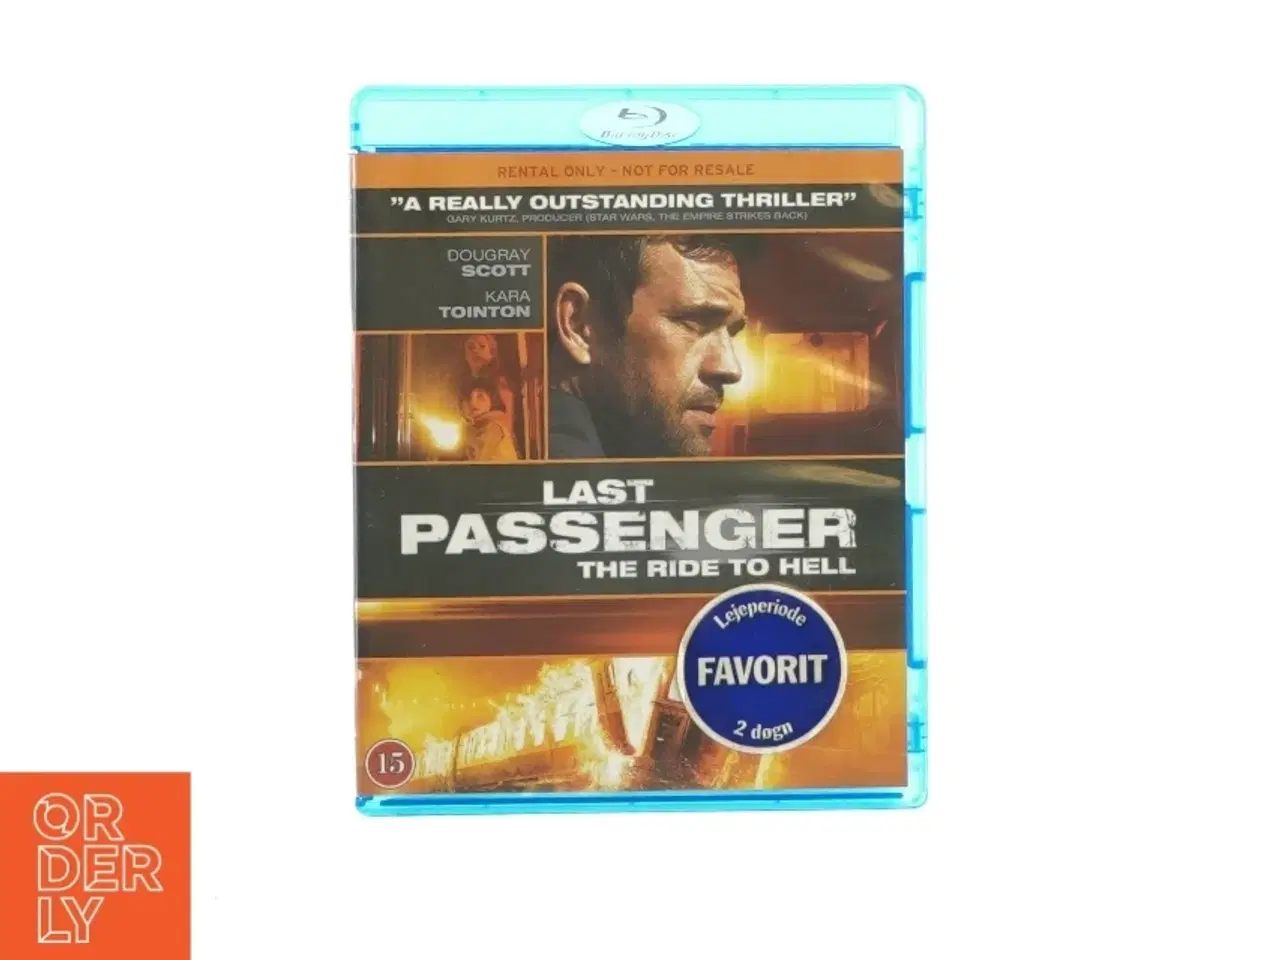 Billede 1 - Last passenger - the ride to hell (Blu-ray)